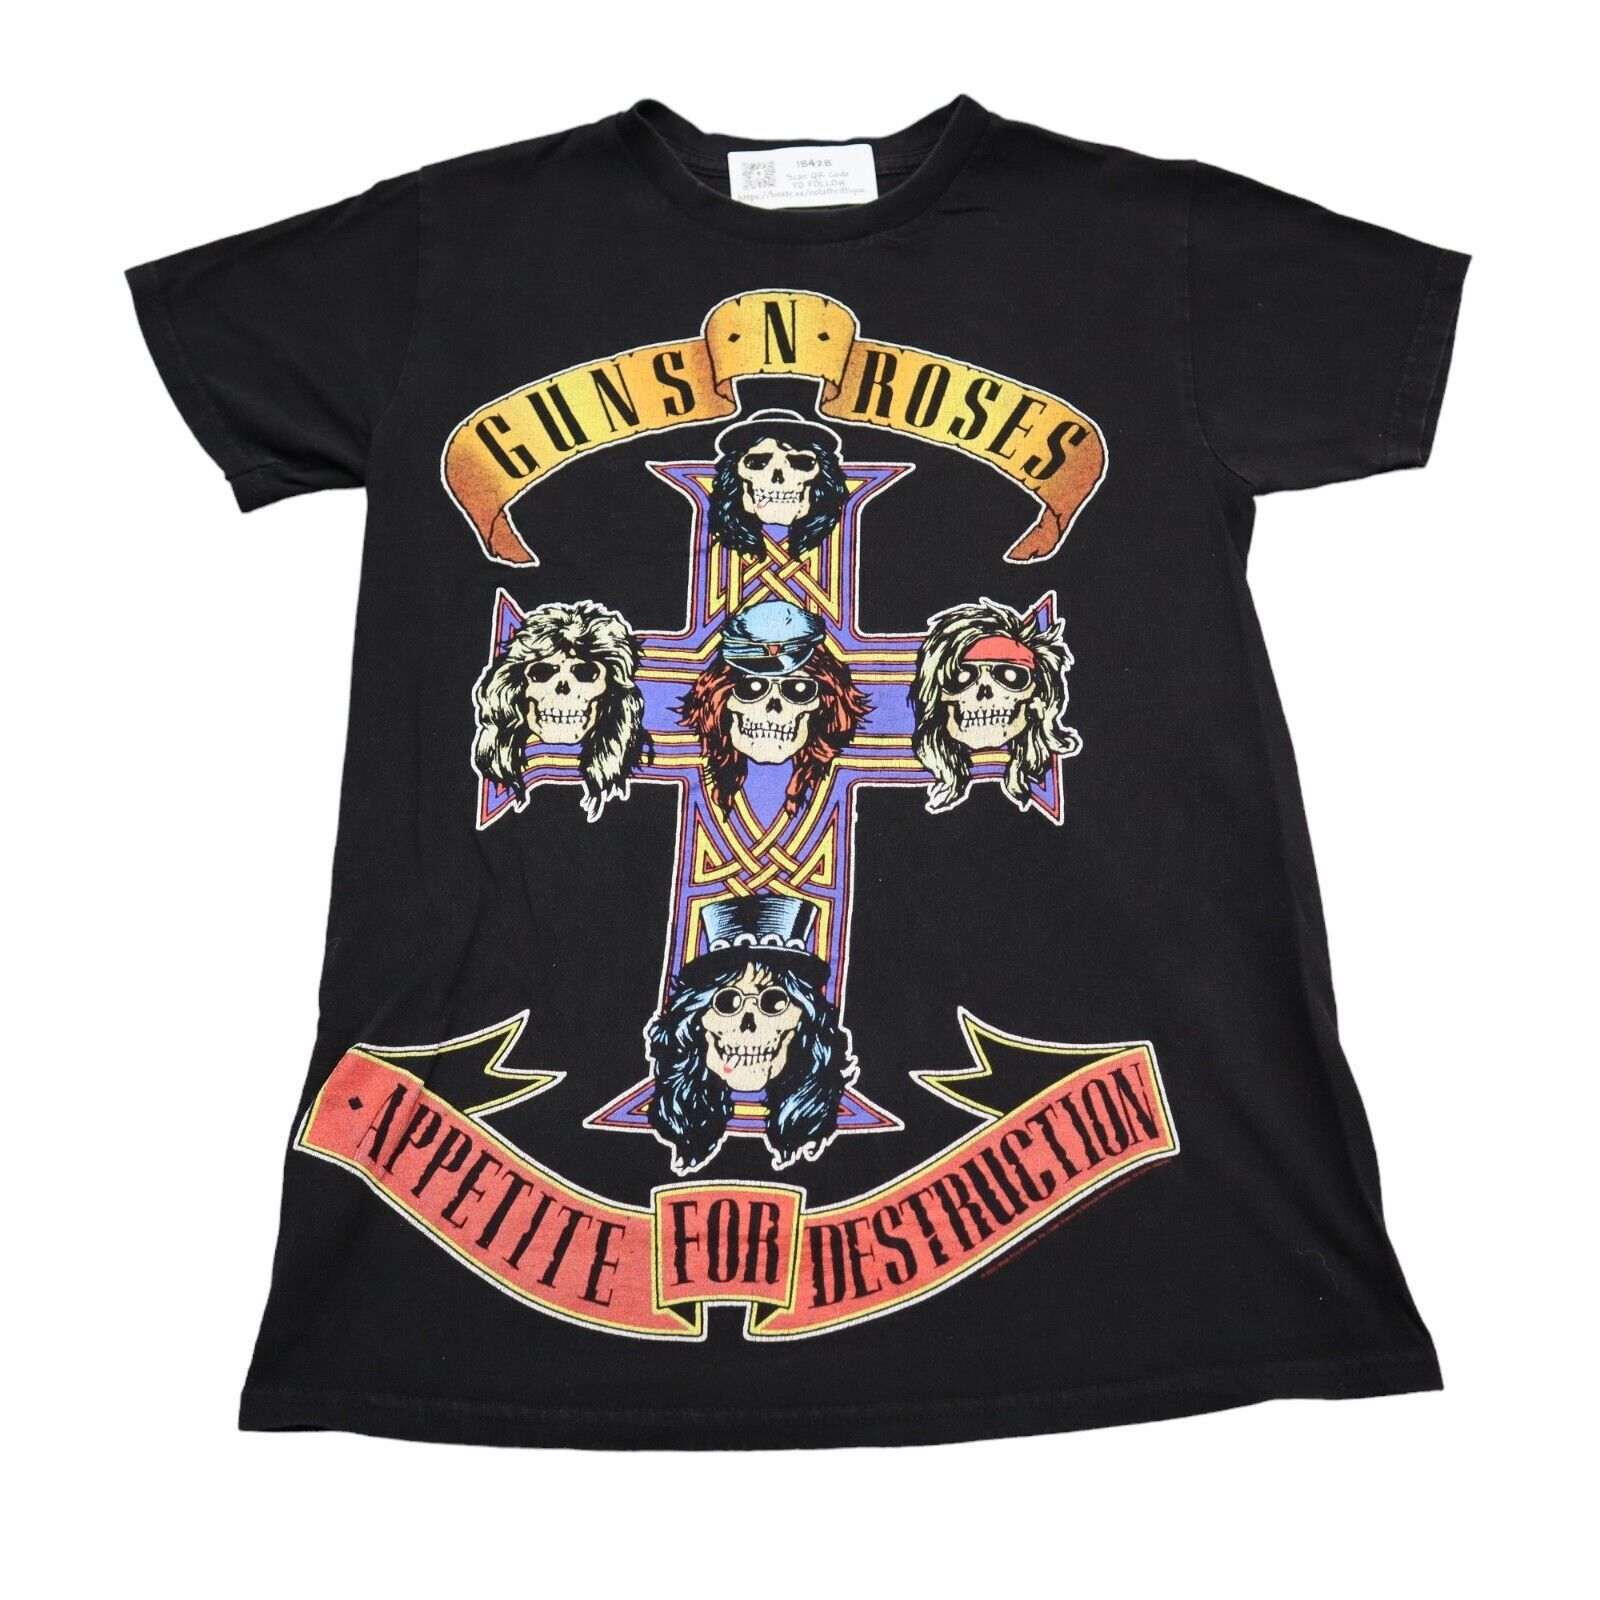 Primary image for Guns N Roses Shirt Womens S Black Short Sleeve Crew Neck Graphic Print Tee